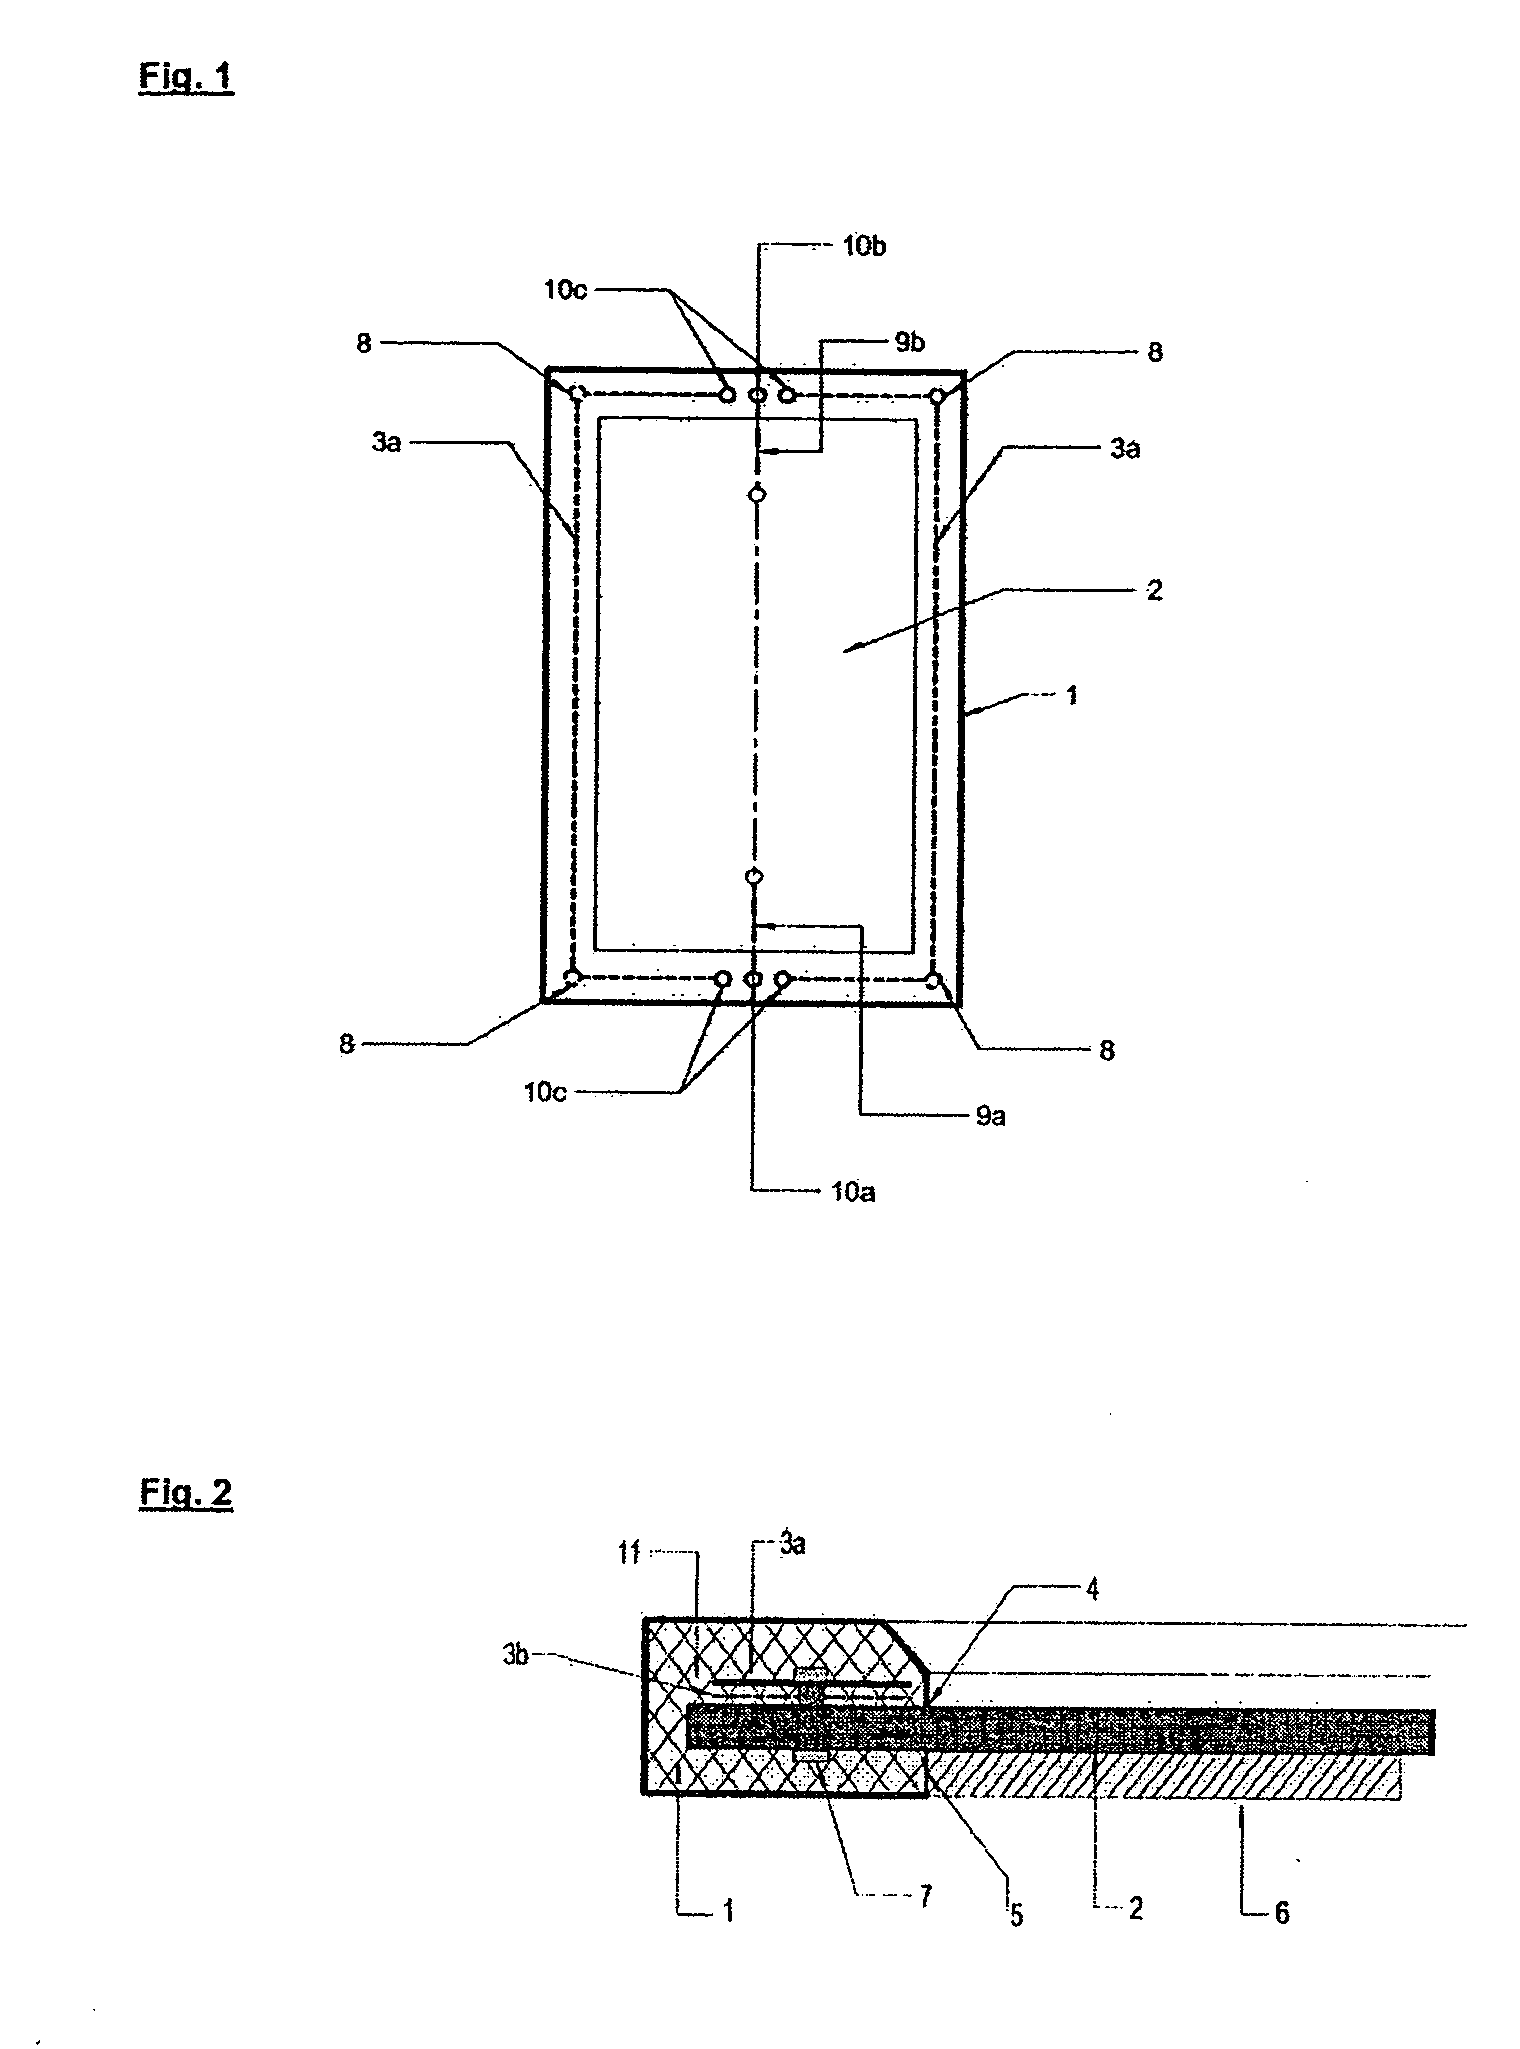 Flexible solar power module with a current lead integrated in the frame